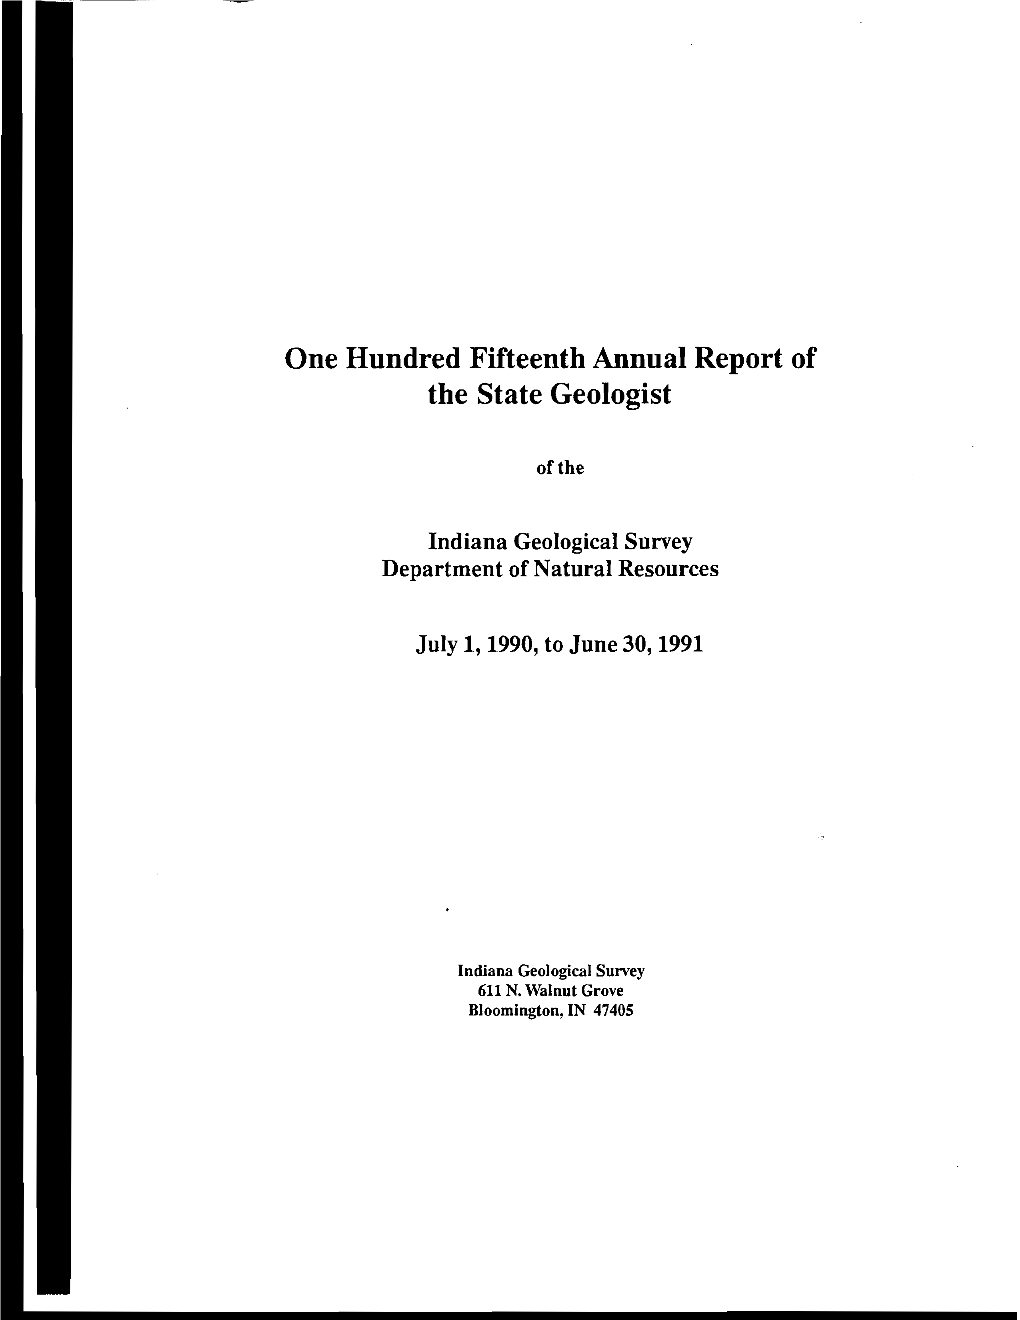 One Hundred Fifteenth Annual Report of the State Geologist